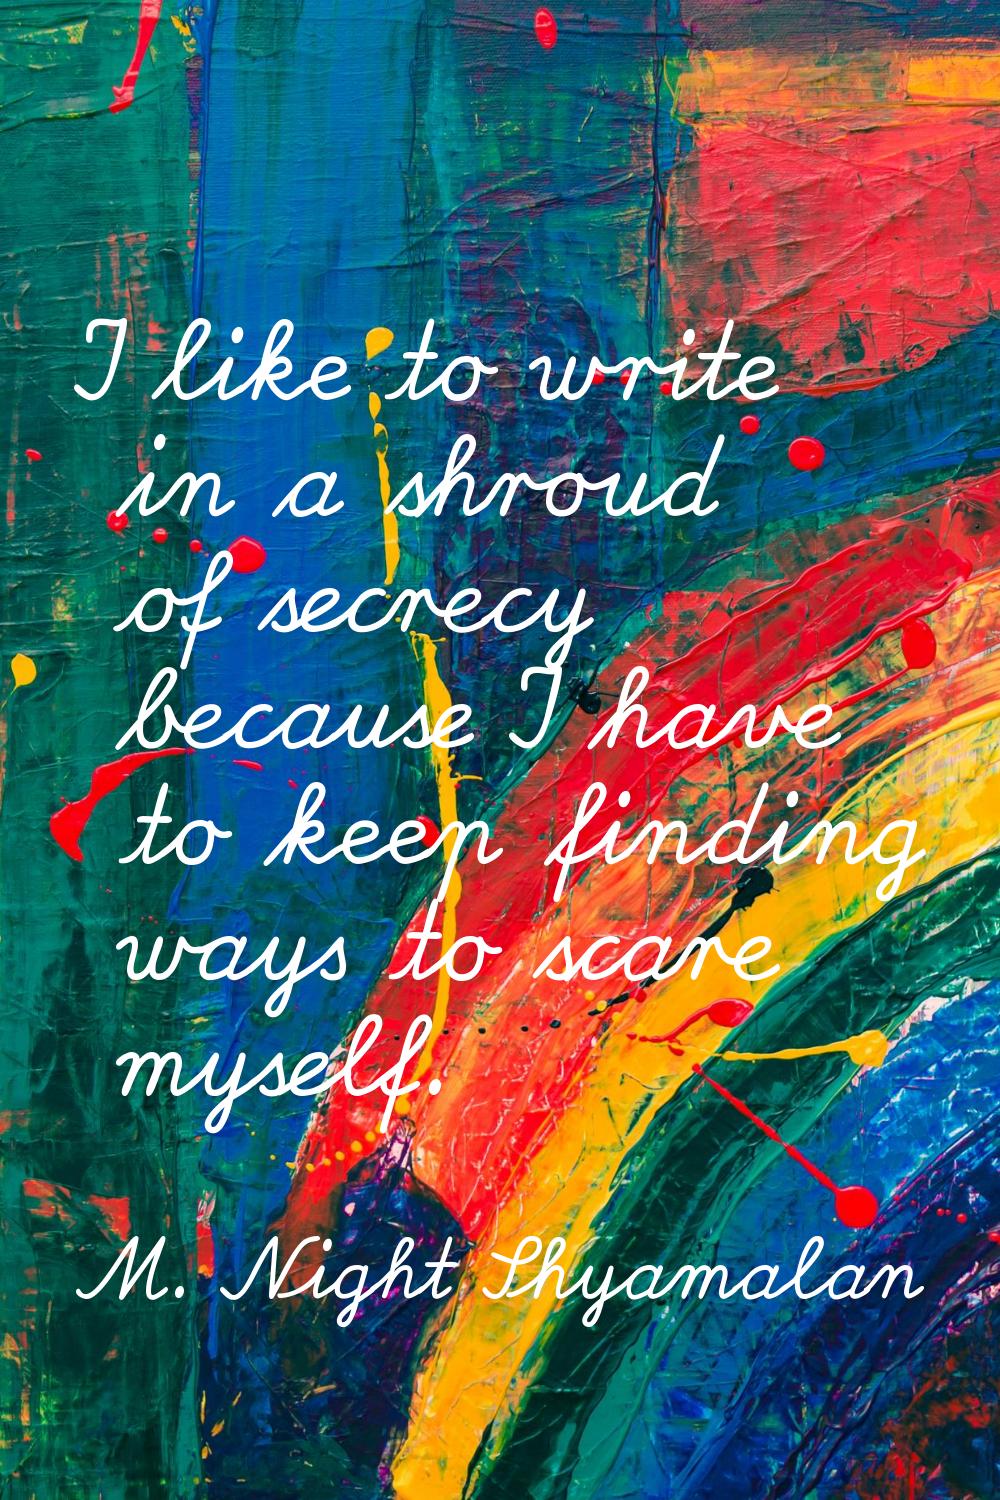 I like to write in a shroud of secrecy because I have to keep finding ways to scare myself.